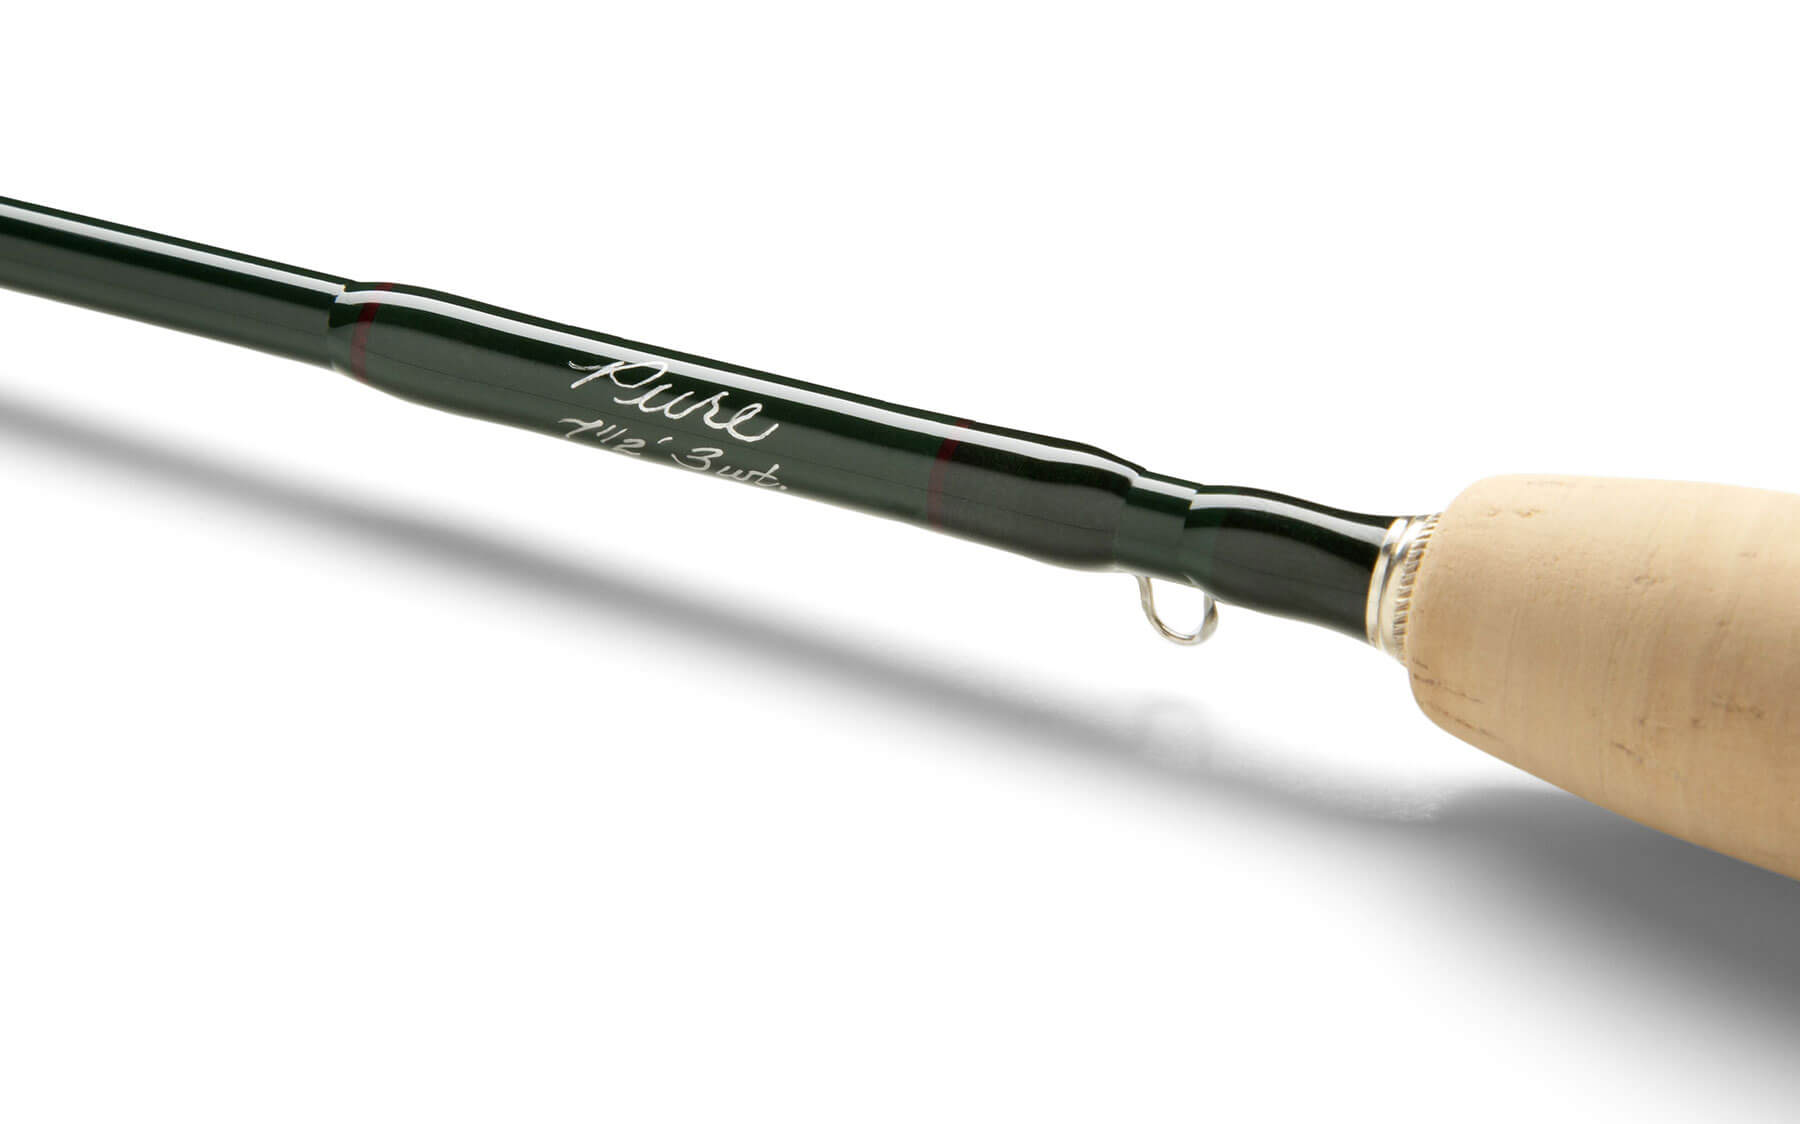 Winston Pure 9' 4-weight fly rod